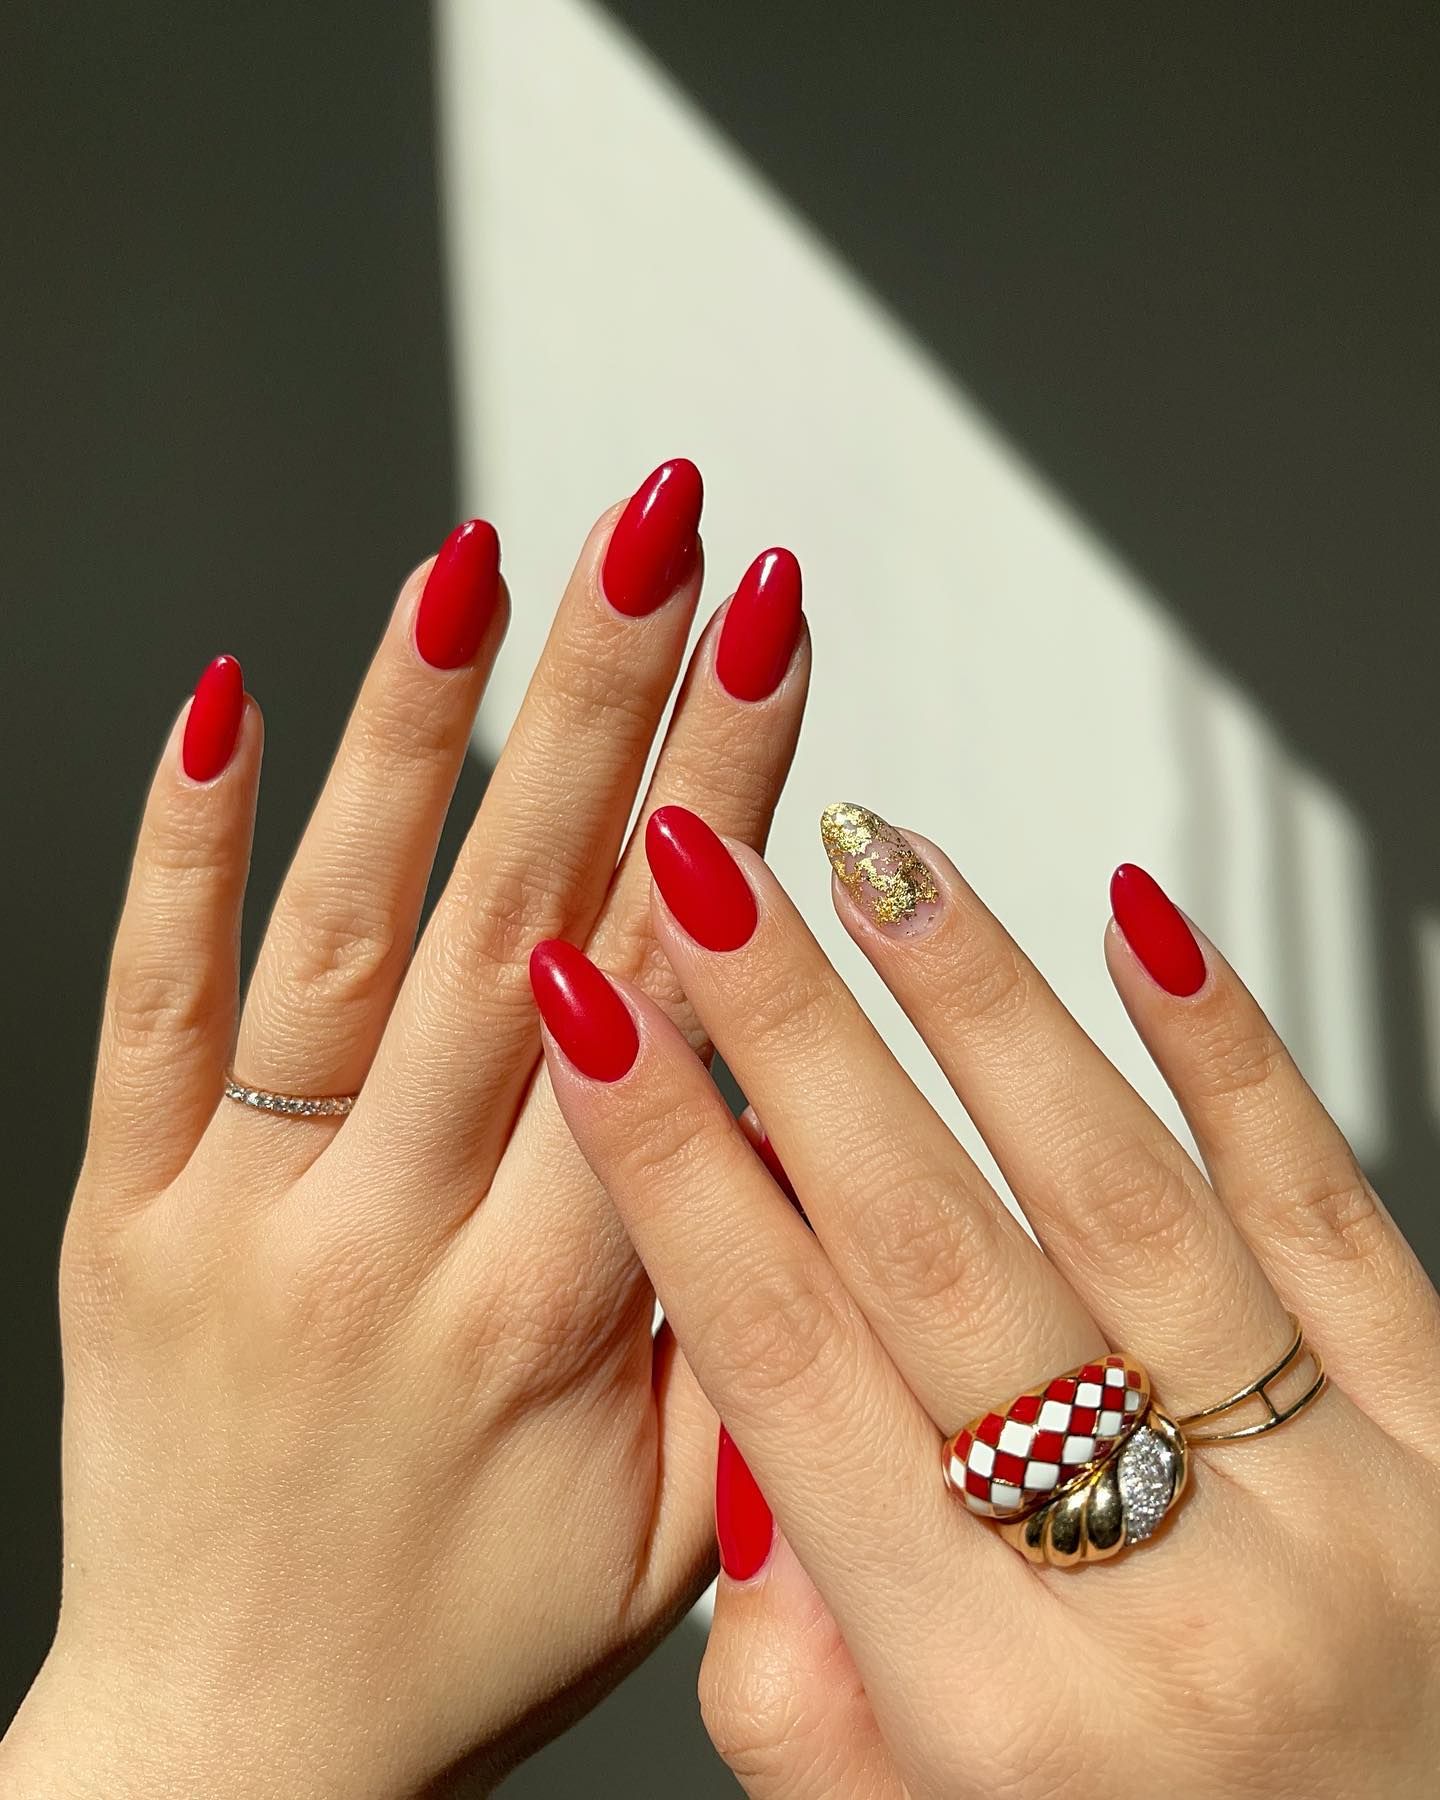 The 10 Winter Nail Trends We Can't Wait to Wear